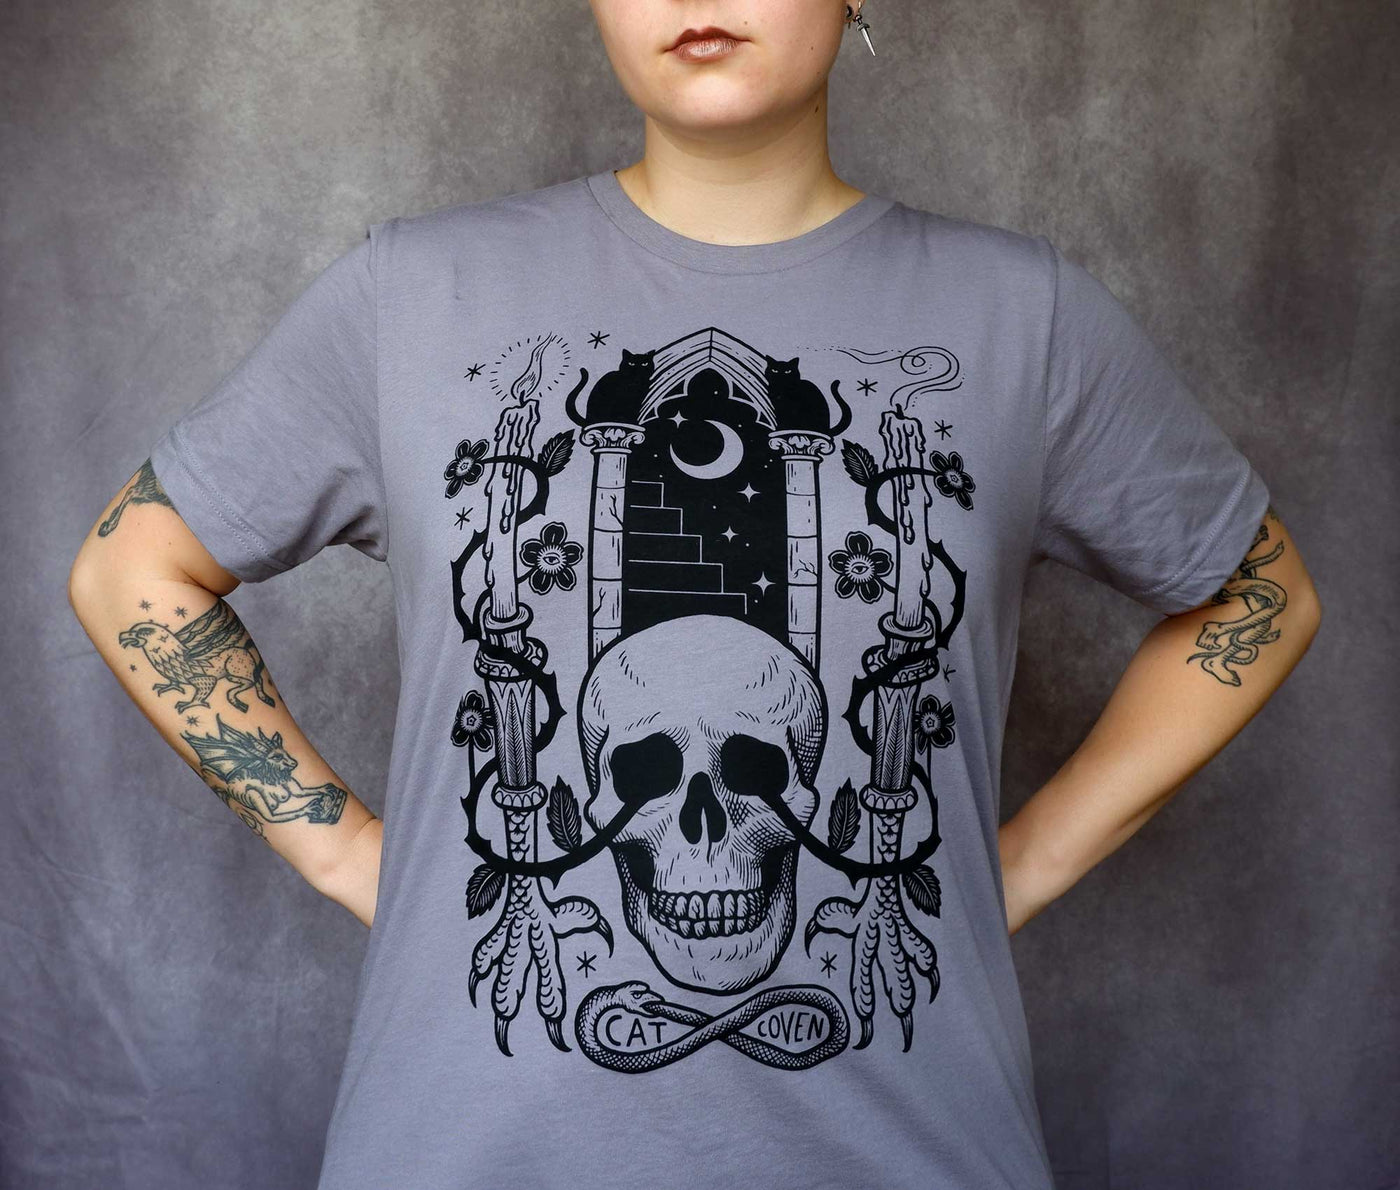 Keepers of the Gate - Screen printed T-shirt